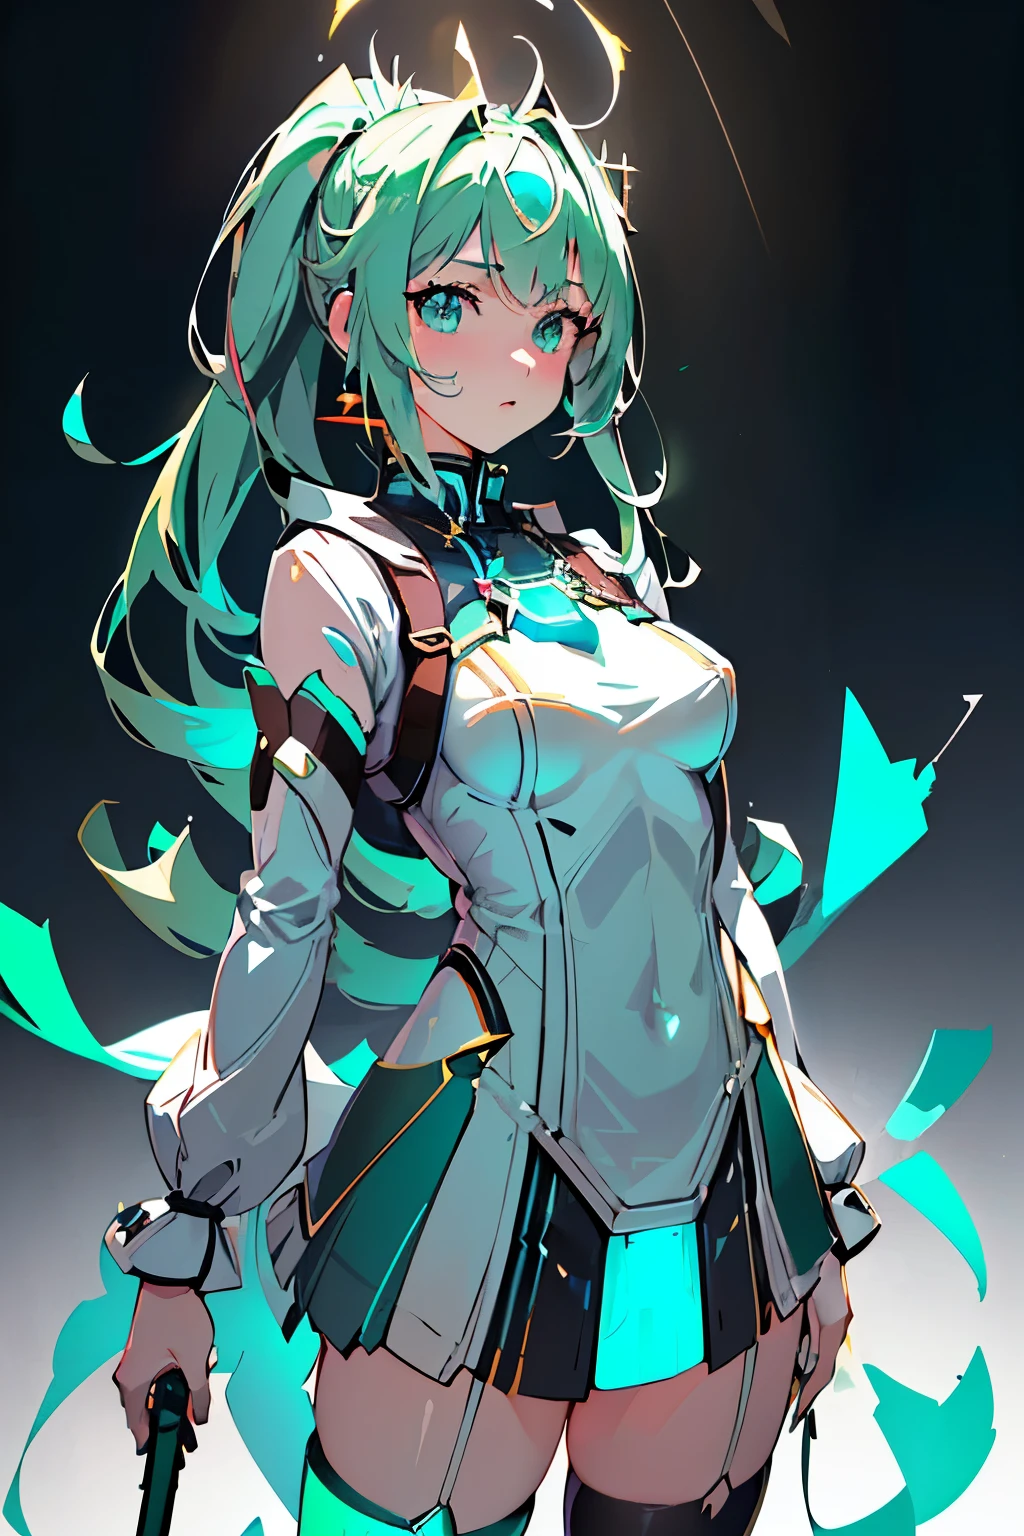 Anime, Girl, (((1girl))), (((Waifu, Xenoblade Chronicles 2, Pneuma Waifu))), Techwear, (((Seafoam Green Hair, Long Hair))), ((Seafoam Green Eyes eyes:1.3, Upturned Eyes: 1, Perfect Eyes, Beautiful Detailed Eyes, Gradient eyes: 1, Finely Detailed Beautiful Eyes: 1, Symmetrical Eyes: 1, Big Highlight On Eyes: 1.2, Hoshino Ai's Star Eyes)), (((Lustrous Skin: 1.5, Bright Skin: 1.5, Skin Fair, Shiny Skin, Very Shiny Skin, Shiny Body, Plastic Glitter Skin, Exaggerated Shiny Skin, Illuminated Skin))), (Detailed Body, (Detailed Face)), Young, Idol Pose, (Best Quality), Shirt, Loose Skirt, Stockings, Garterbelt, Modest Clothing, Skin Covered, Cute Disposition, High Resolution, Sharp Focus, Ultra Detailed, Extremely Detailed, Extremely High Quality Artwork, (Realistic, Photorealistic: 1.37), 8k_Wallpaper, (Extremely Detailed CG 8k), (Very Fine 8K CG), ((Hyper Super Ultra Detailed Perfect Piece)), (((Flawlessmasterpiece))), Illustration, Vibrant Colors, (Intricate), High Contrast, Selective Lighting, Double Exposure, HDR (High Dynamic Range), Post-processing, Background Blur